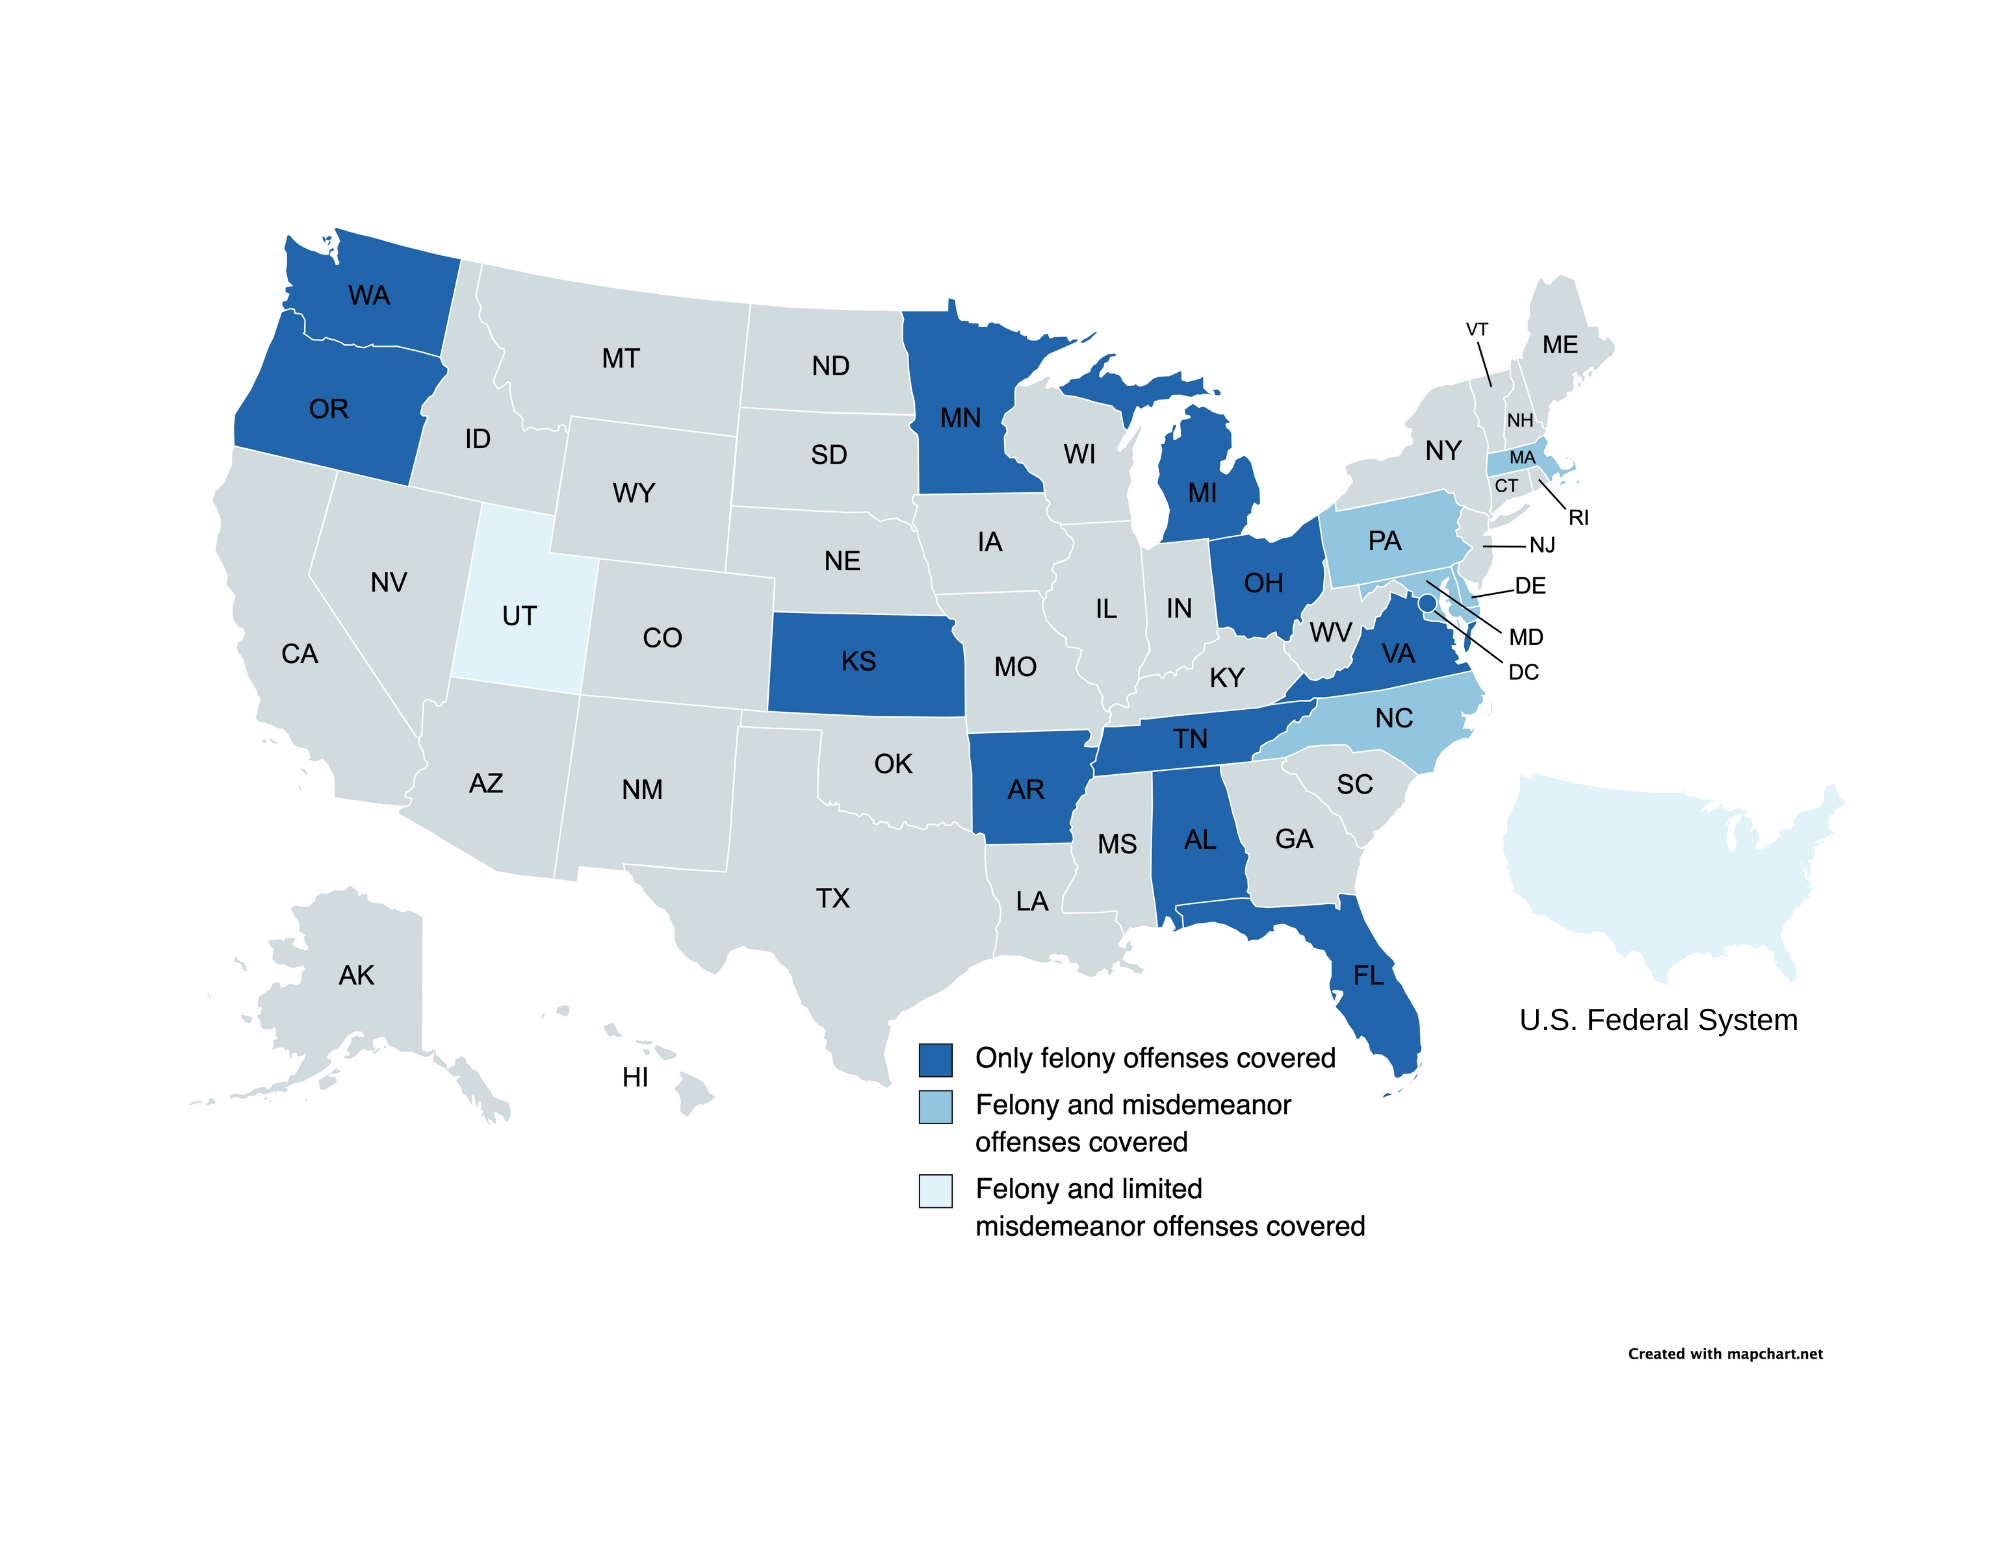 Non-Felony Offenses Covered Map